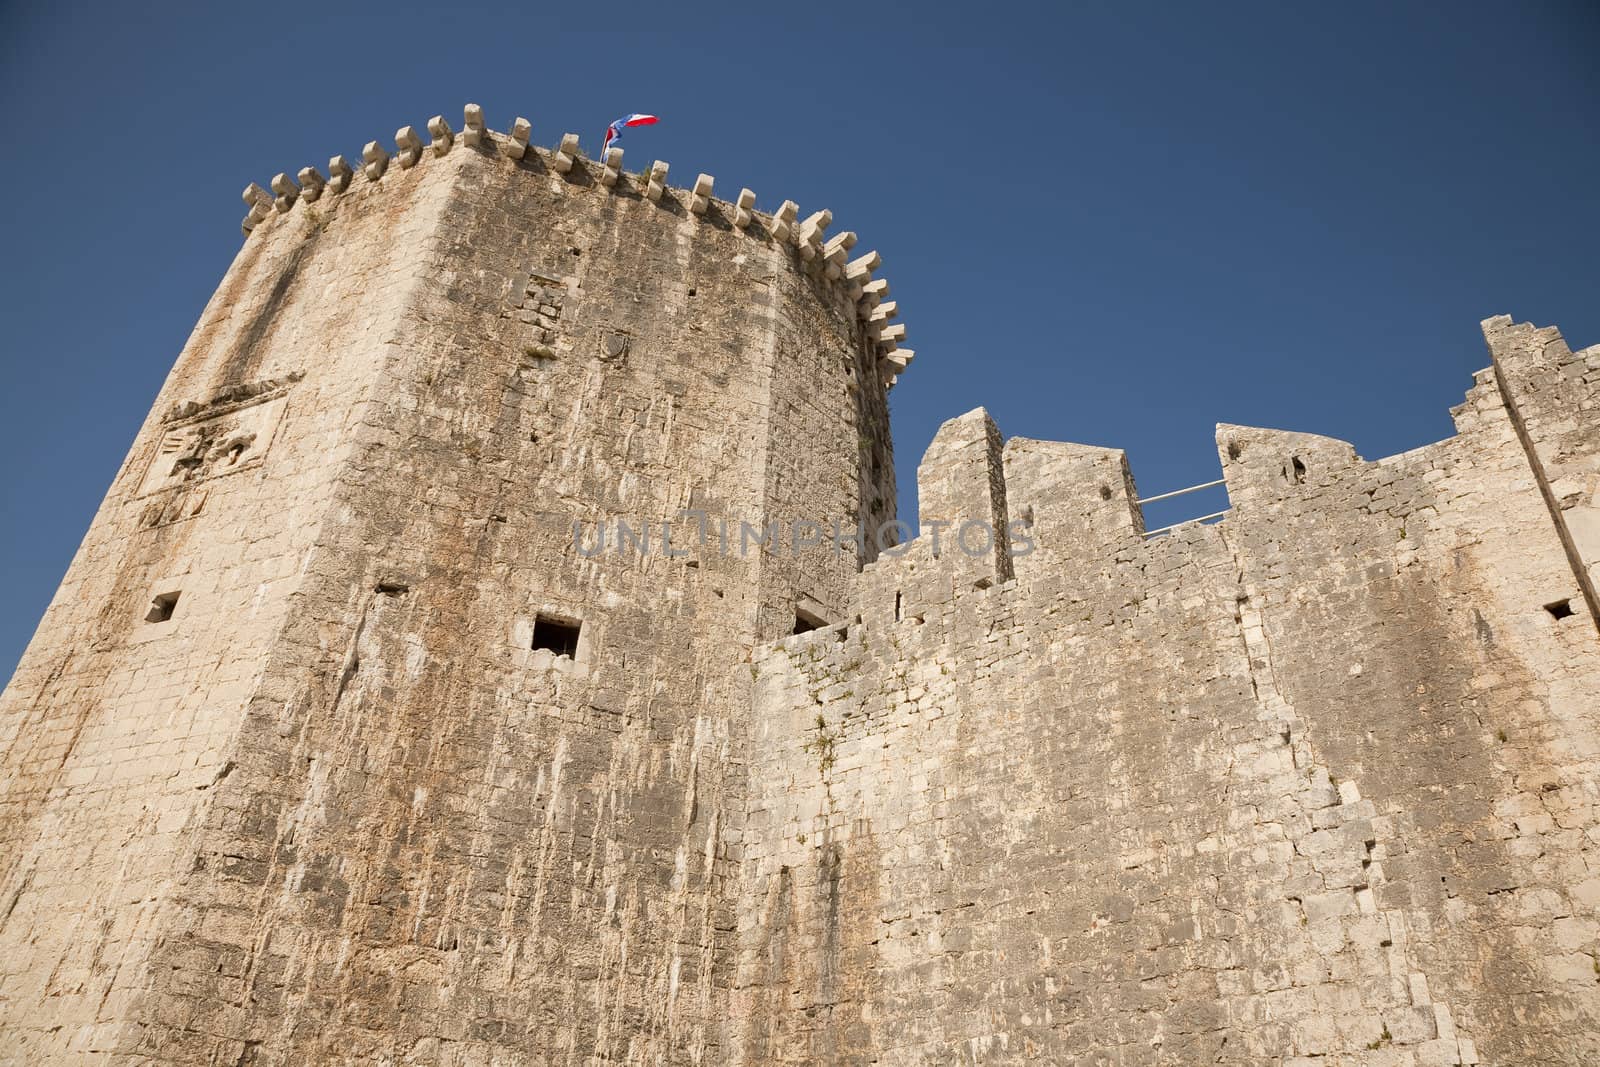 Detail of the ancient castle of Trogir, Croatia by the Adriatic Sea. UNESCO World Heritage.